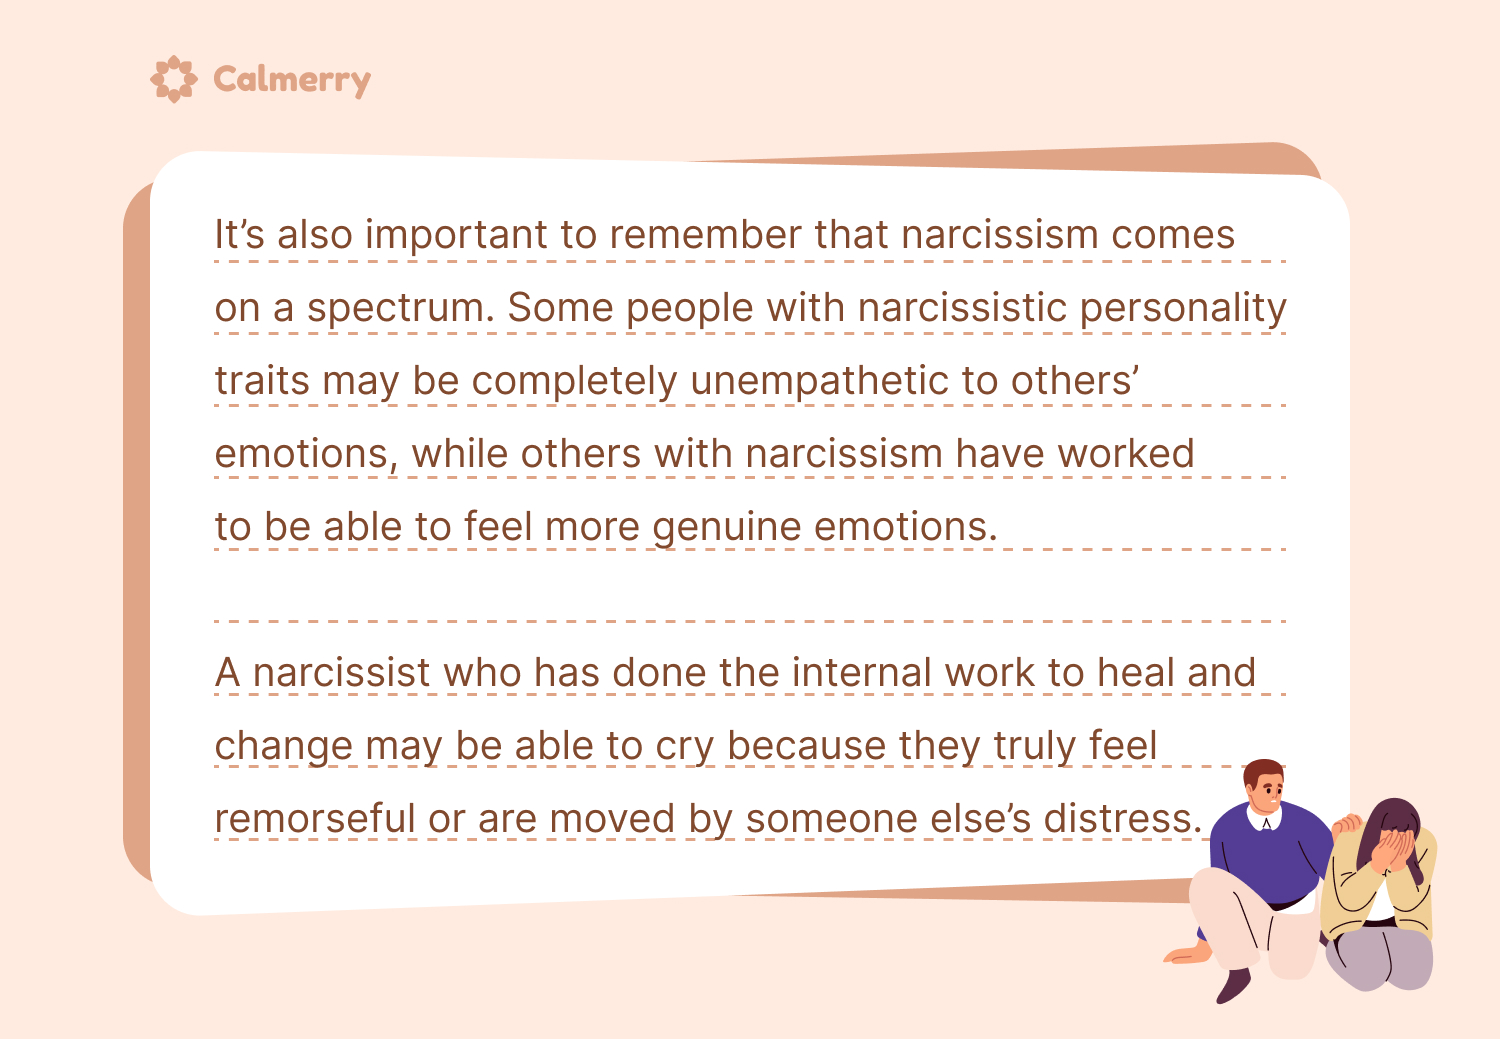 It’s also important to remember that narcissism comes on a spectrum.